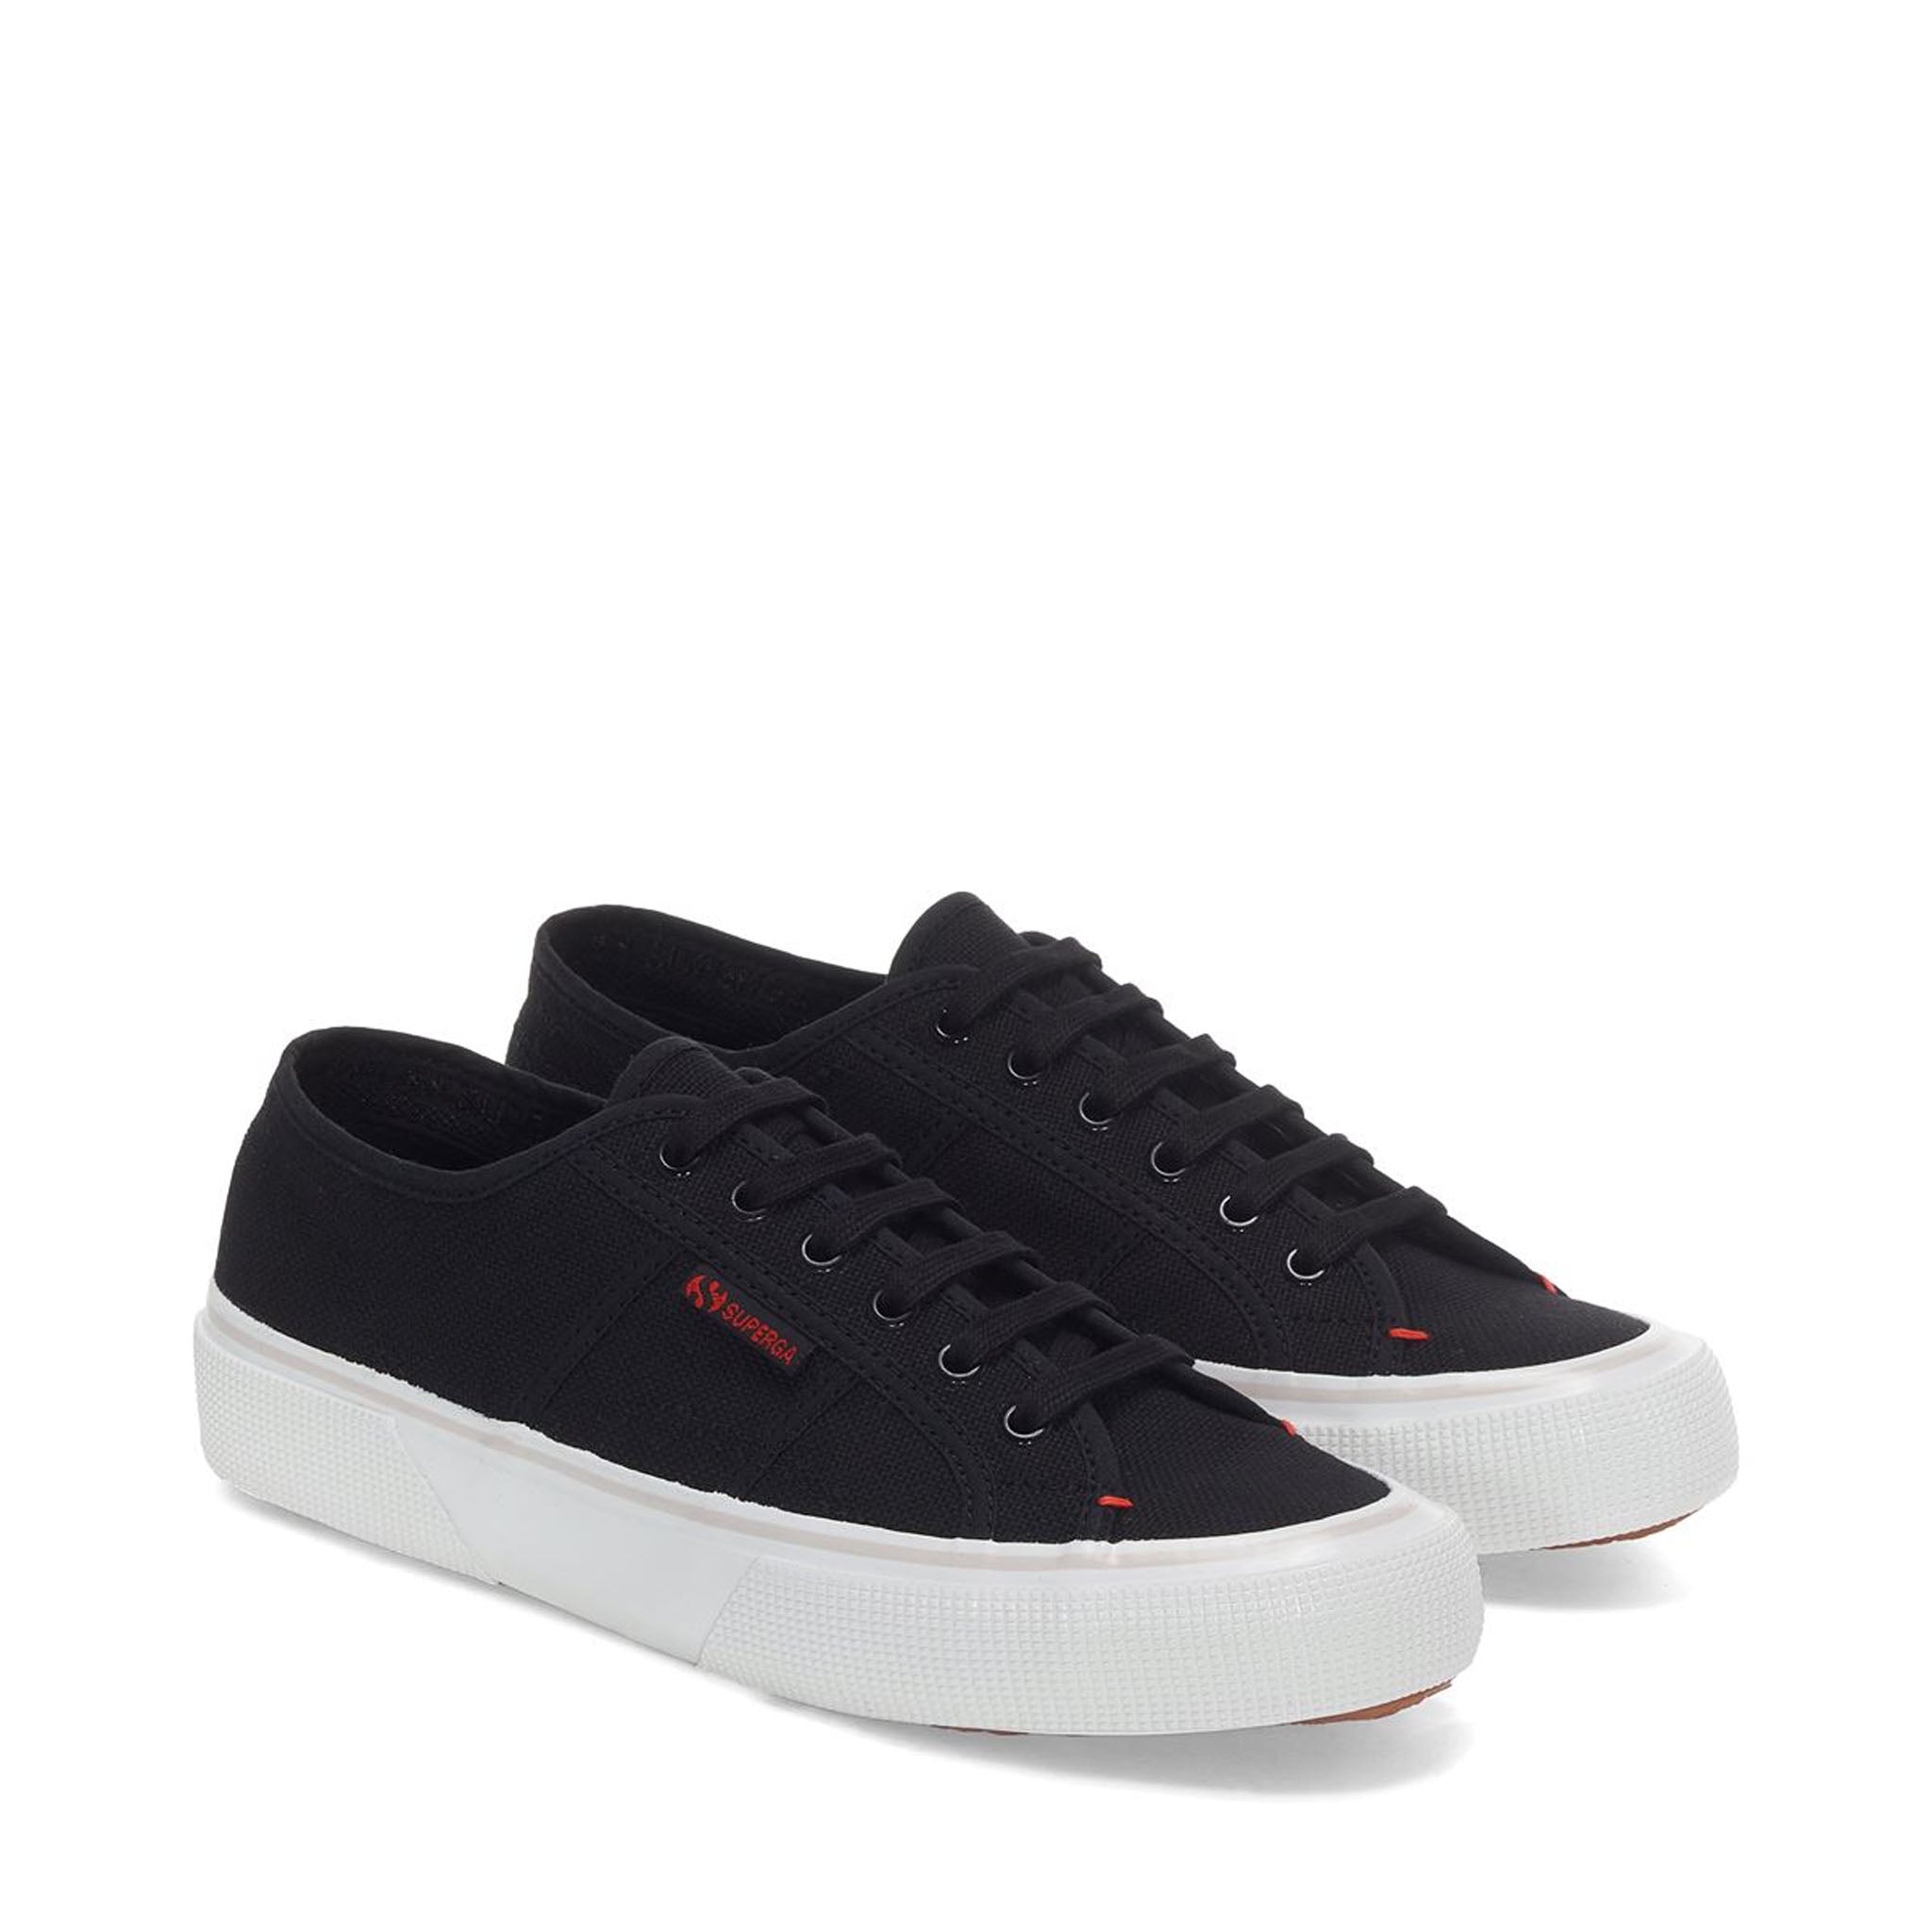 Superga 2490 Bold Sneakers - Black Red. Front view.